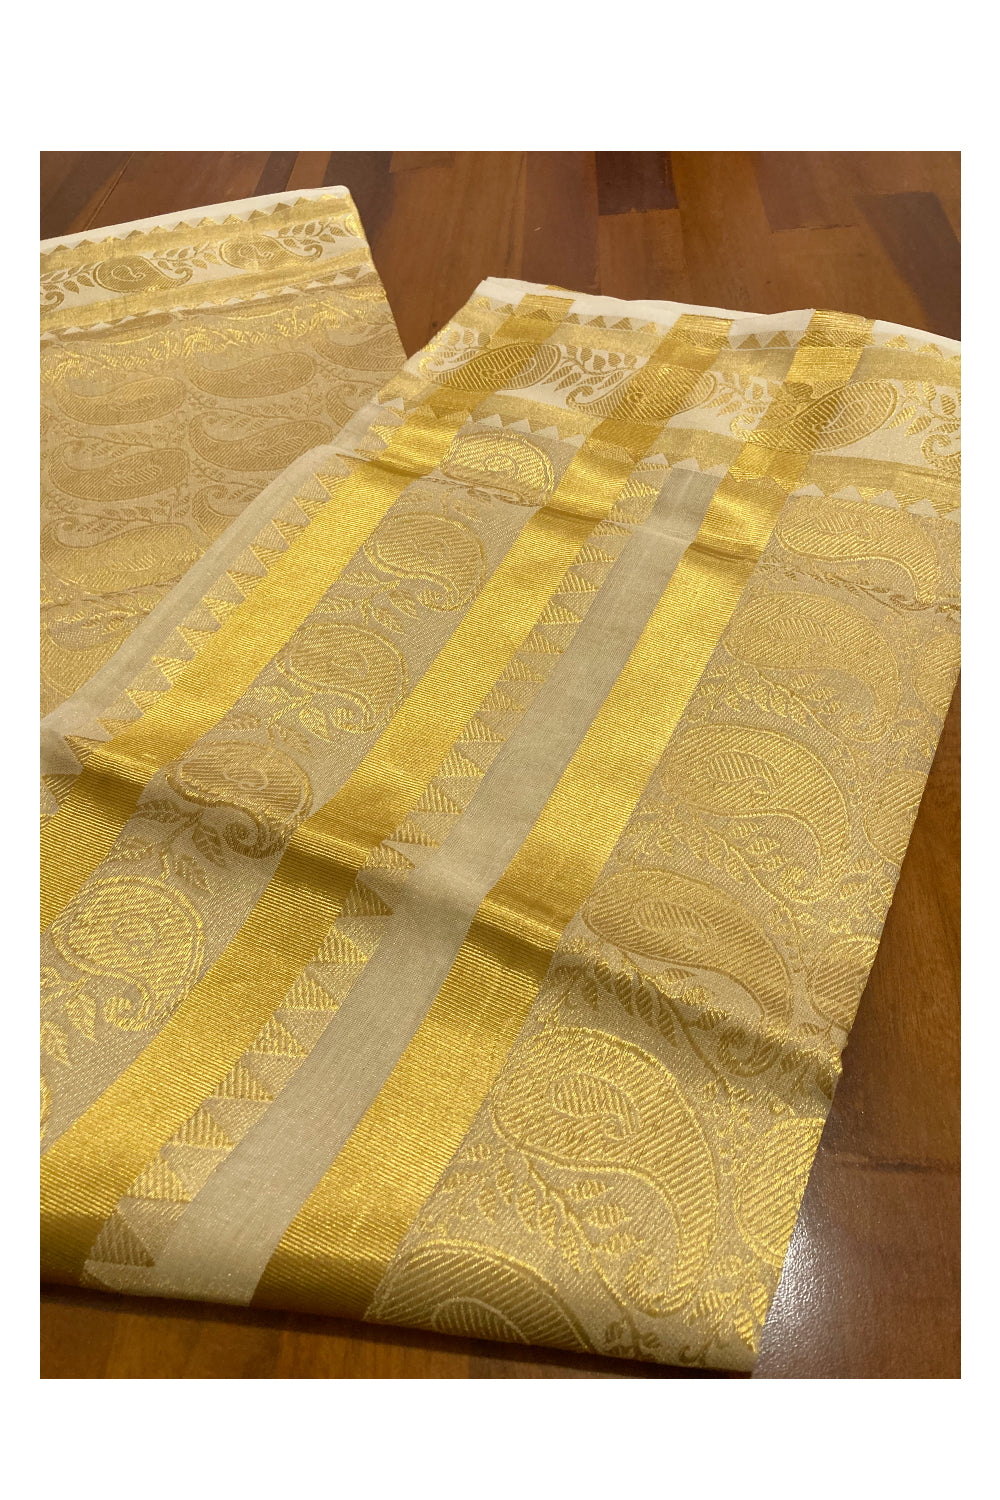 Southloom Premium Tissue Handloom Saree with Paisley Heavy Woven Works